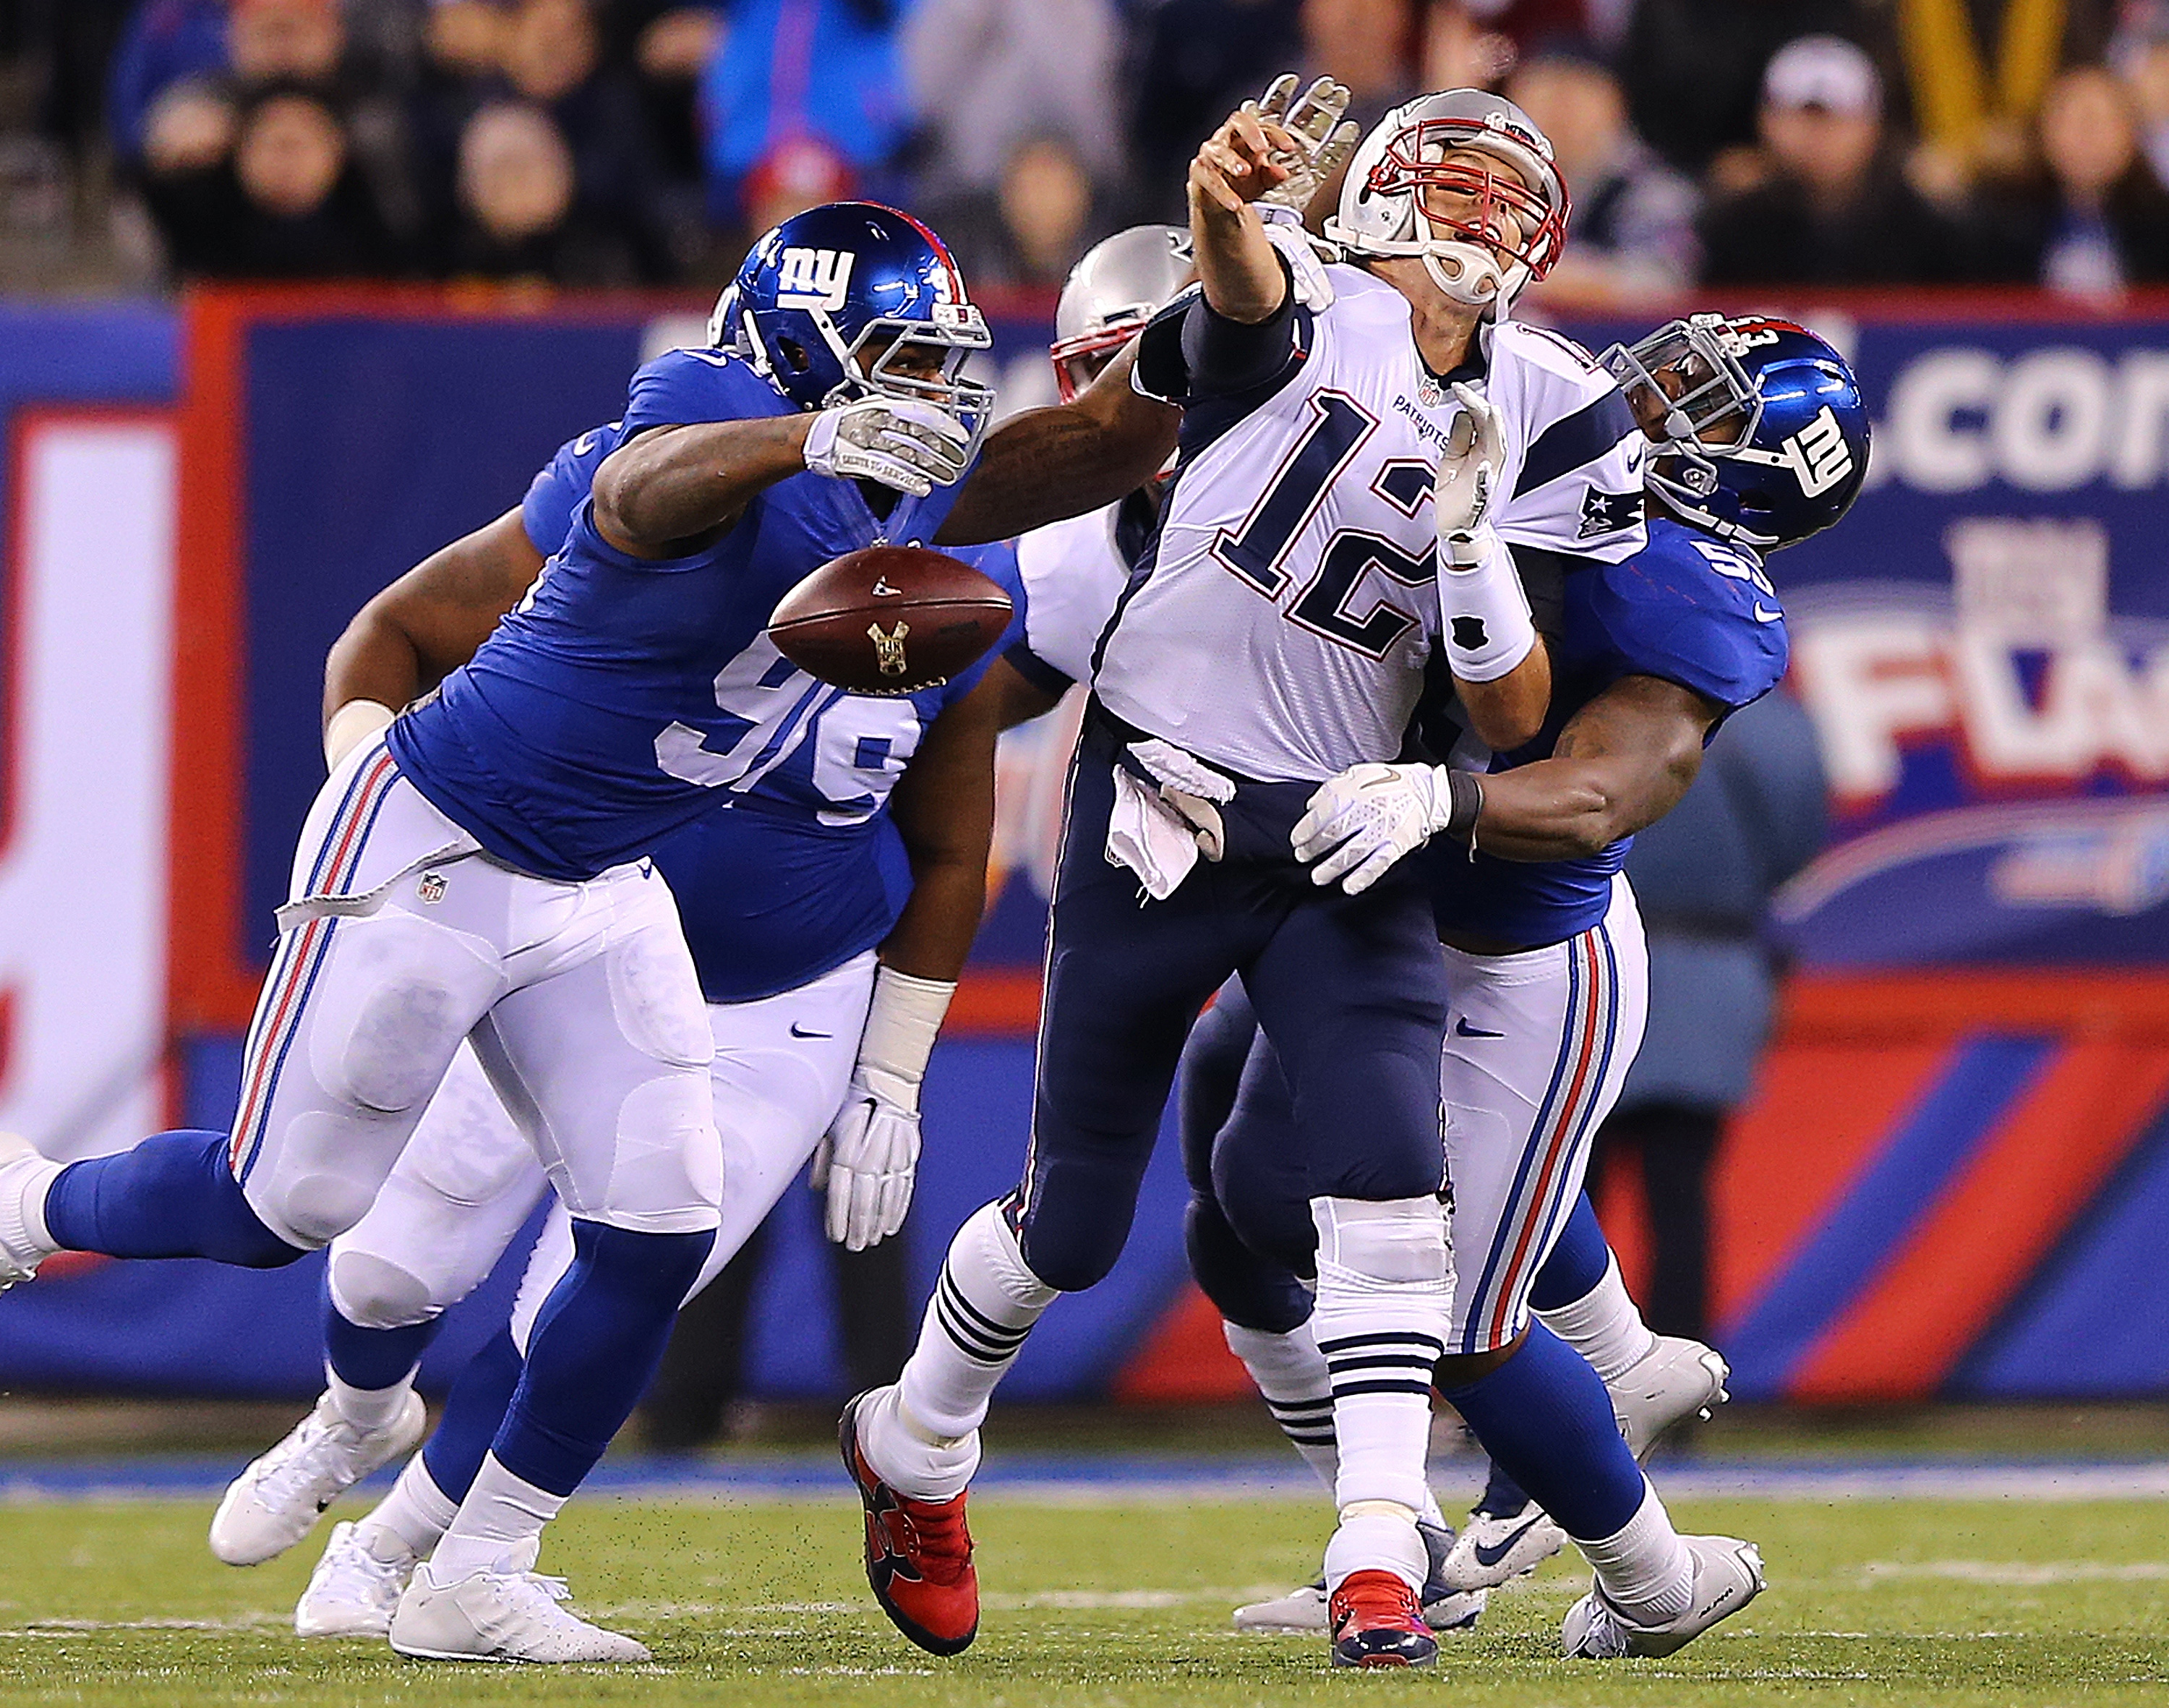 EAST RUTHERFORD, NJ - NOVEMBER 15: Tom Brady #12 of the New England Patriots Tom Brady fumbles the ball against the New York Giants. (Photo by Elsa/Getty Images)